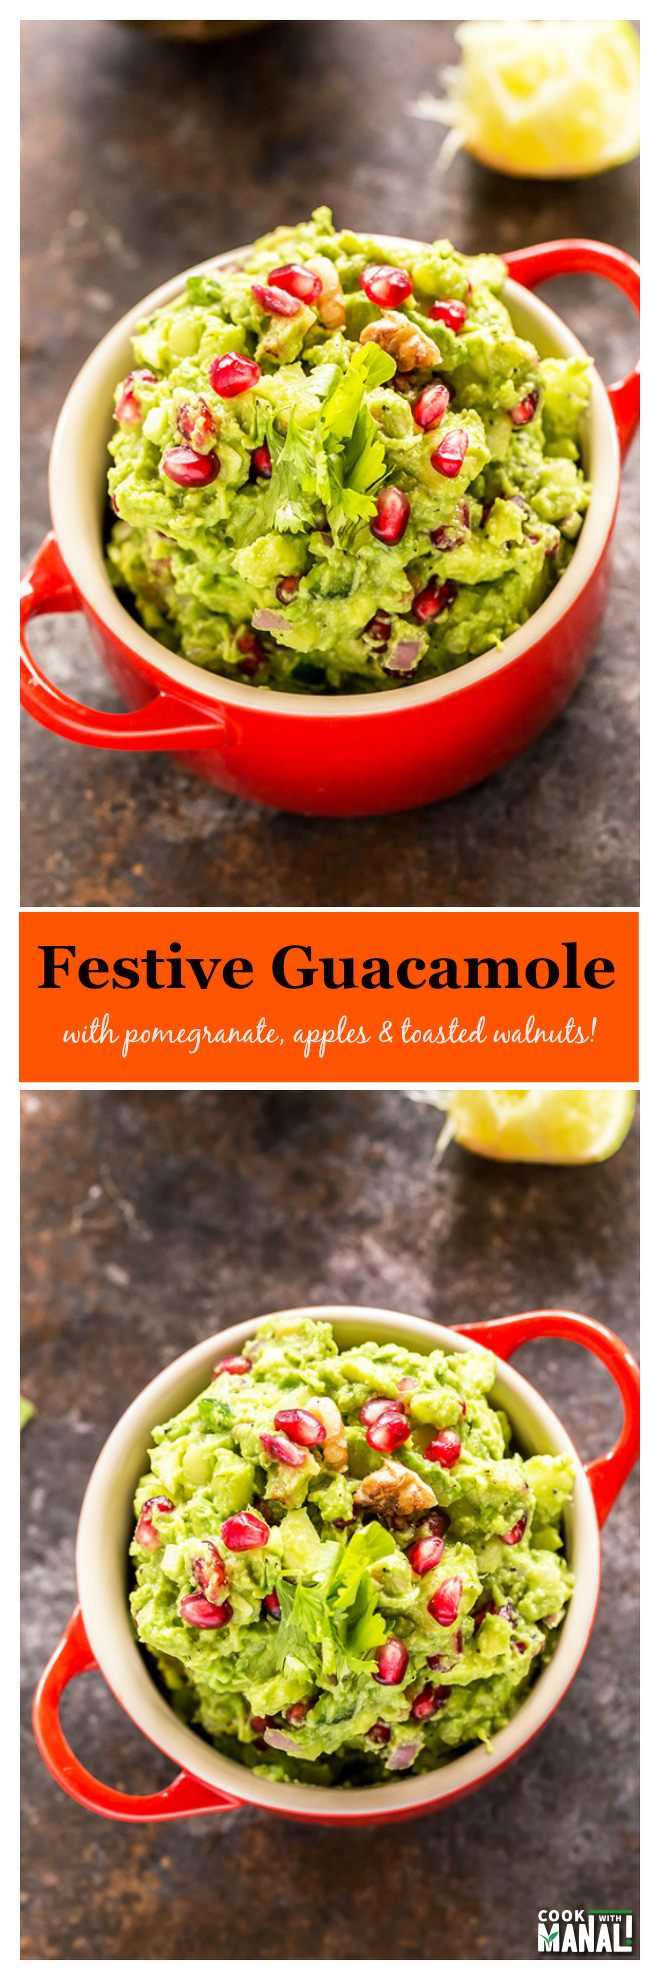 festive-guacamole-with-pomegranate-apples-collage